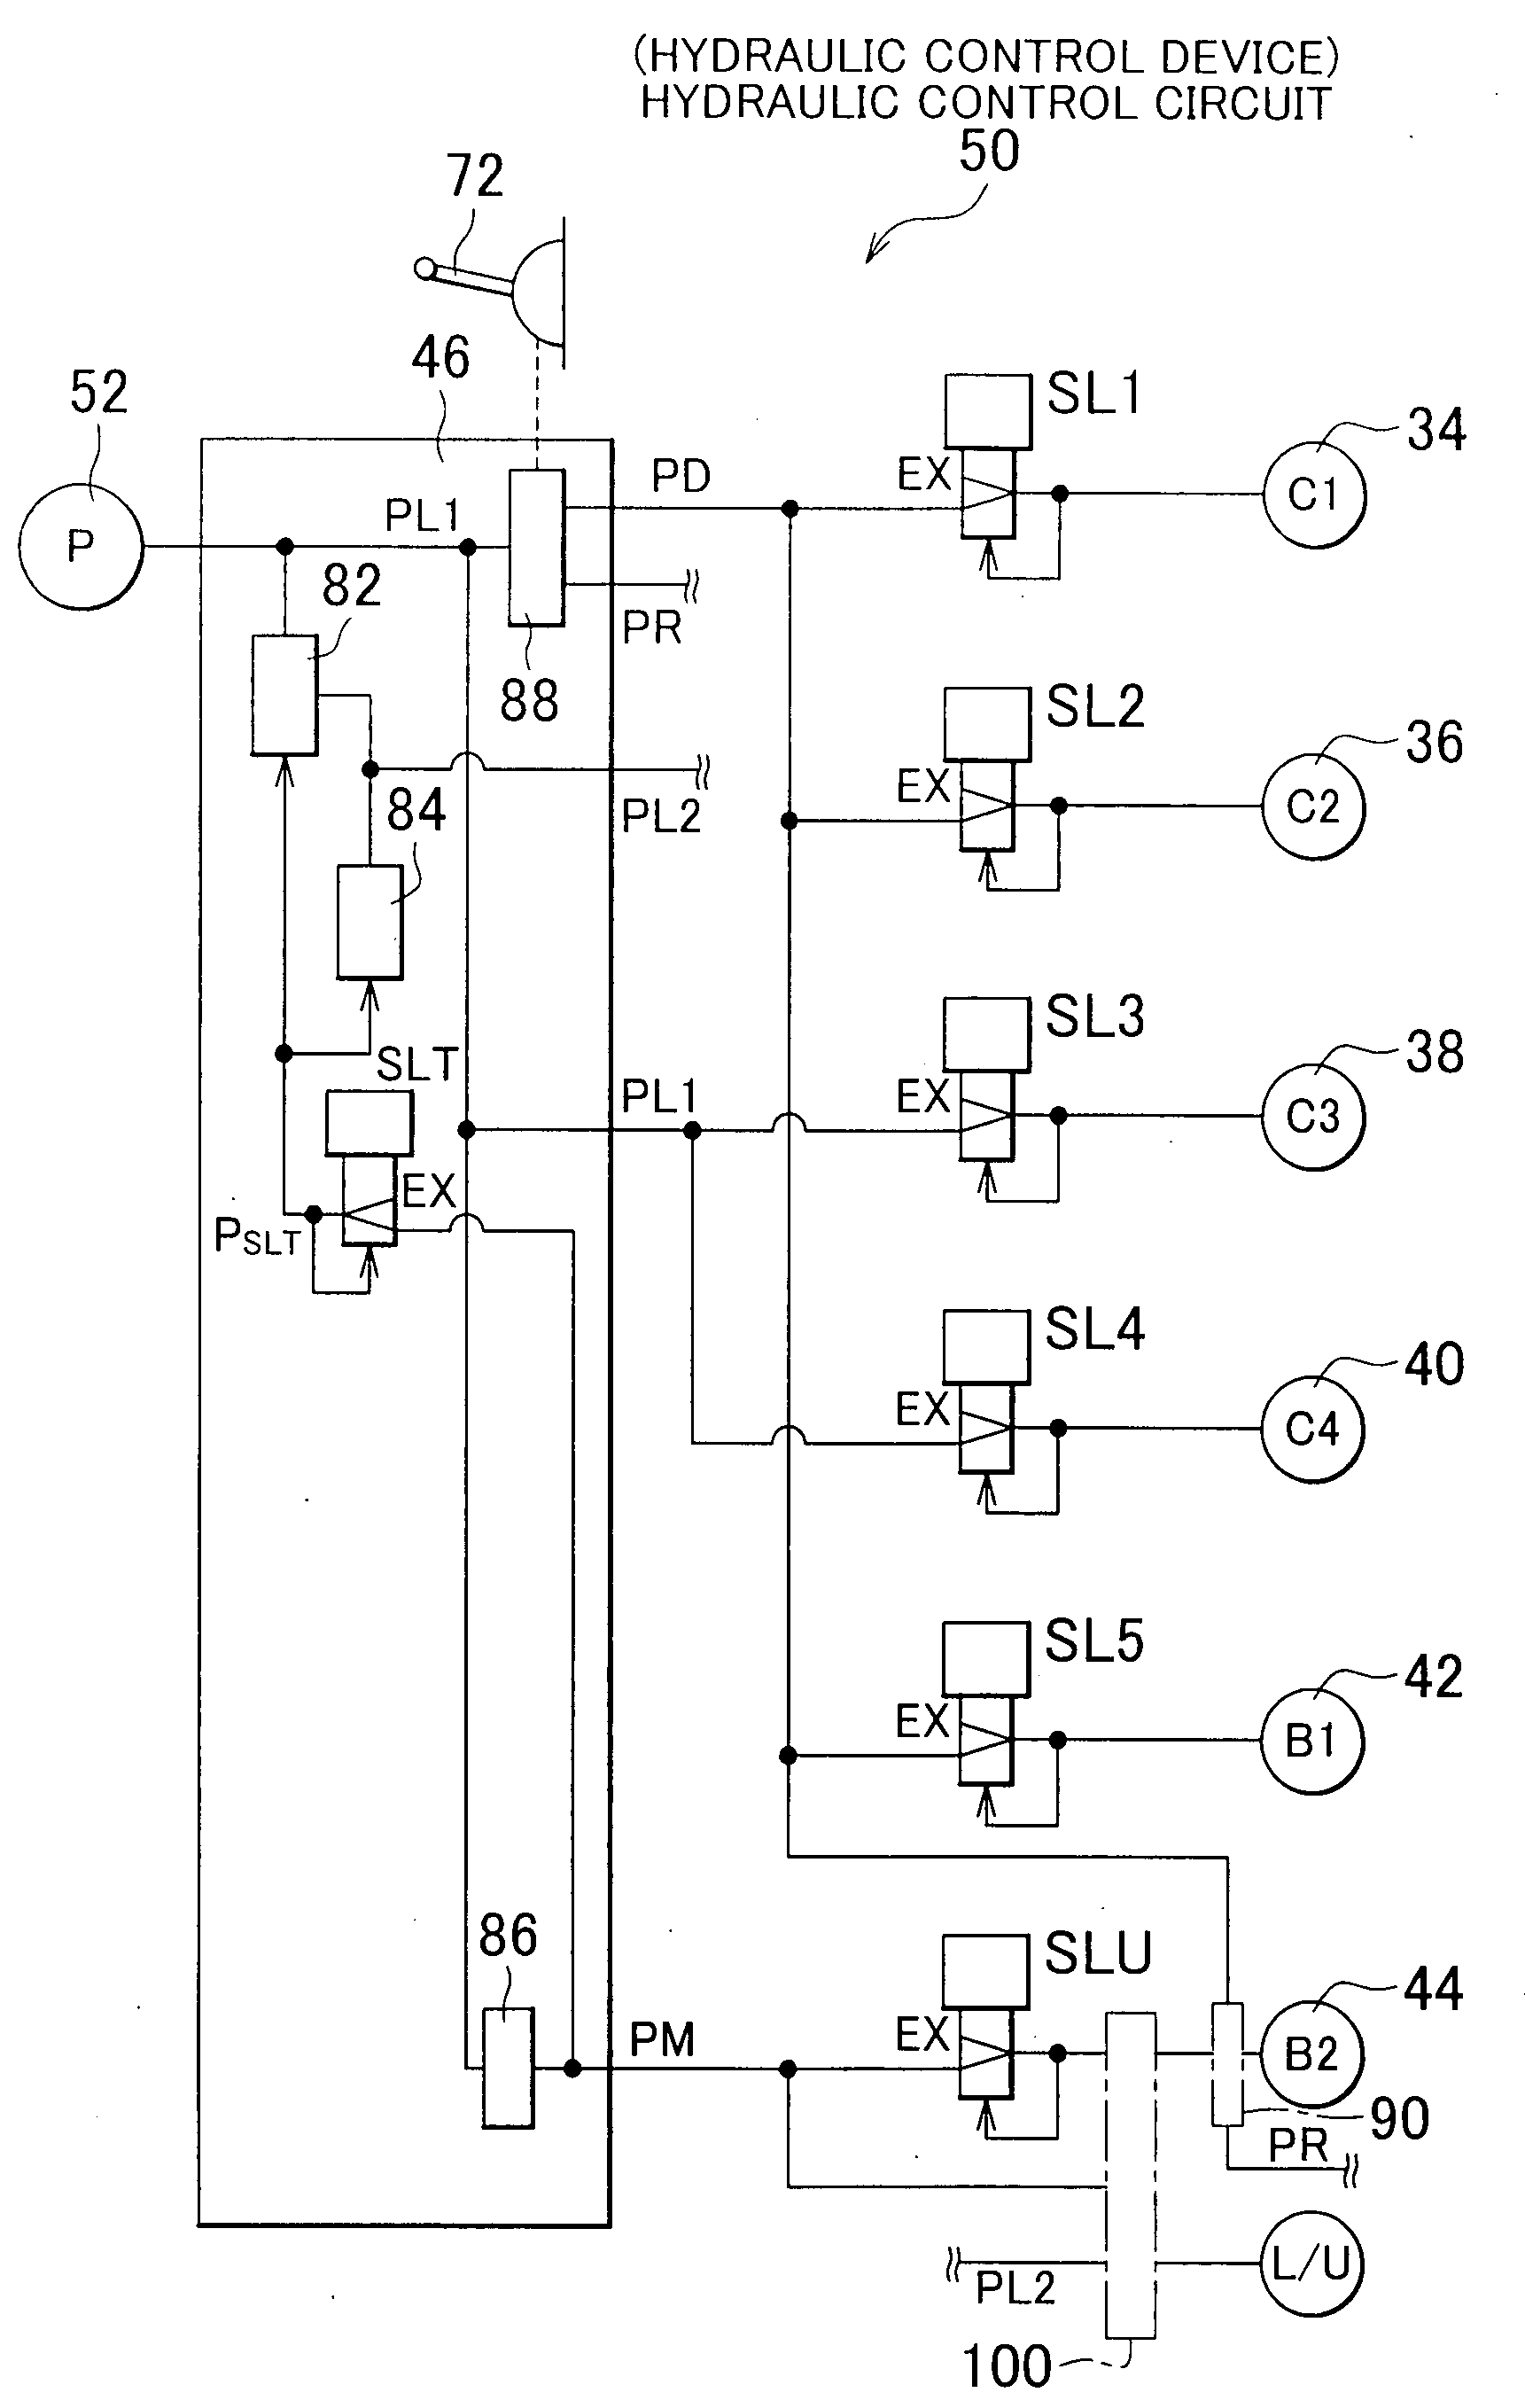 Hydraulic control system for use in a motor vehicle and method for controlling the hydraulic control system